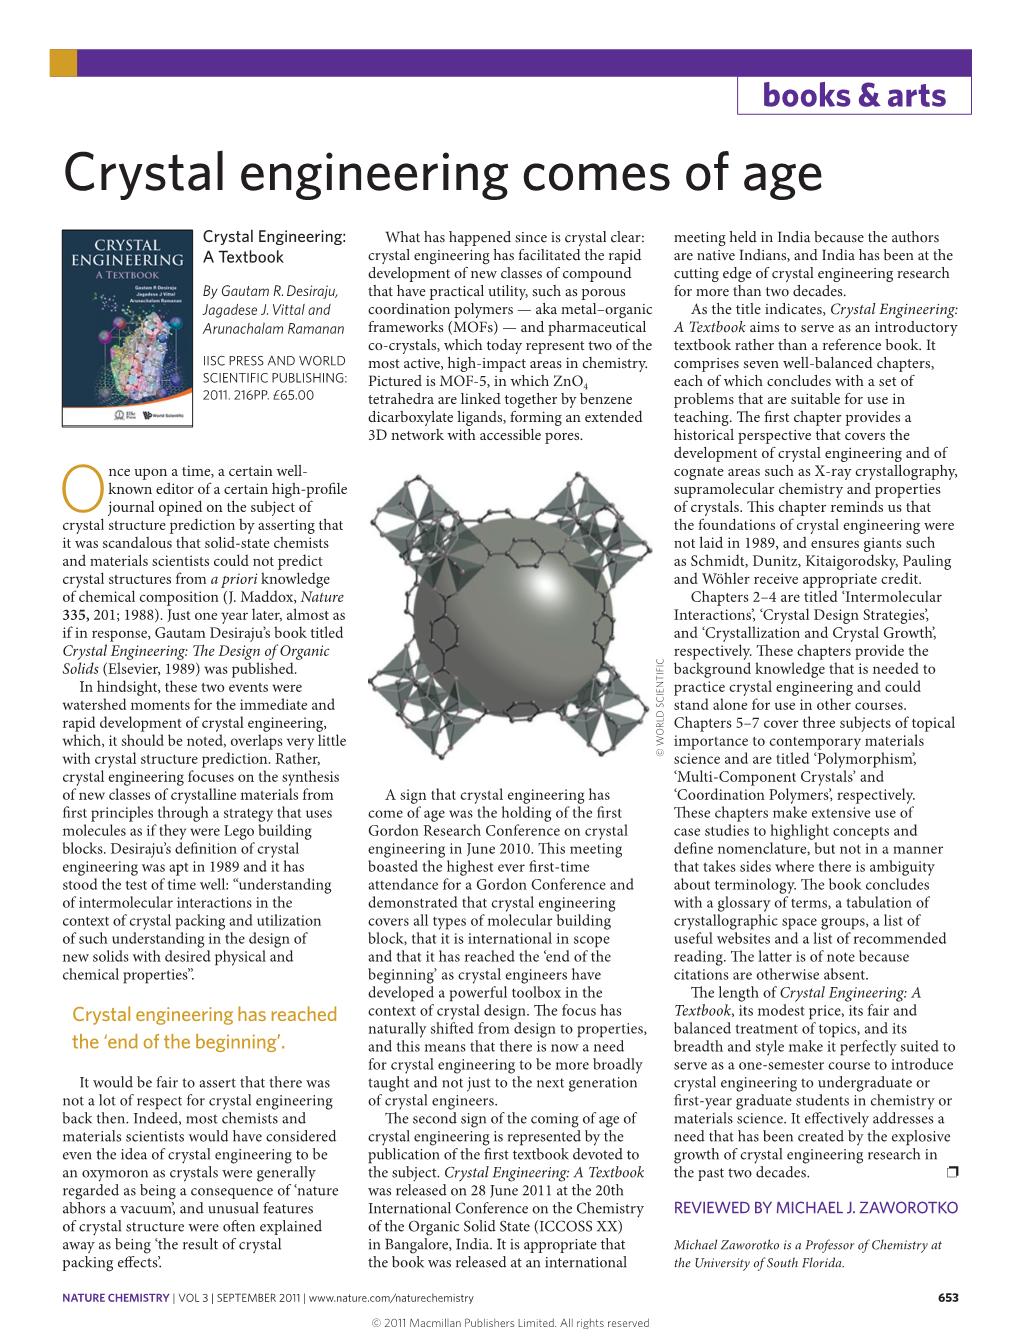 Crystal Engineering Comes of Age